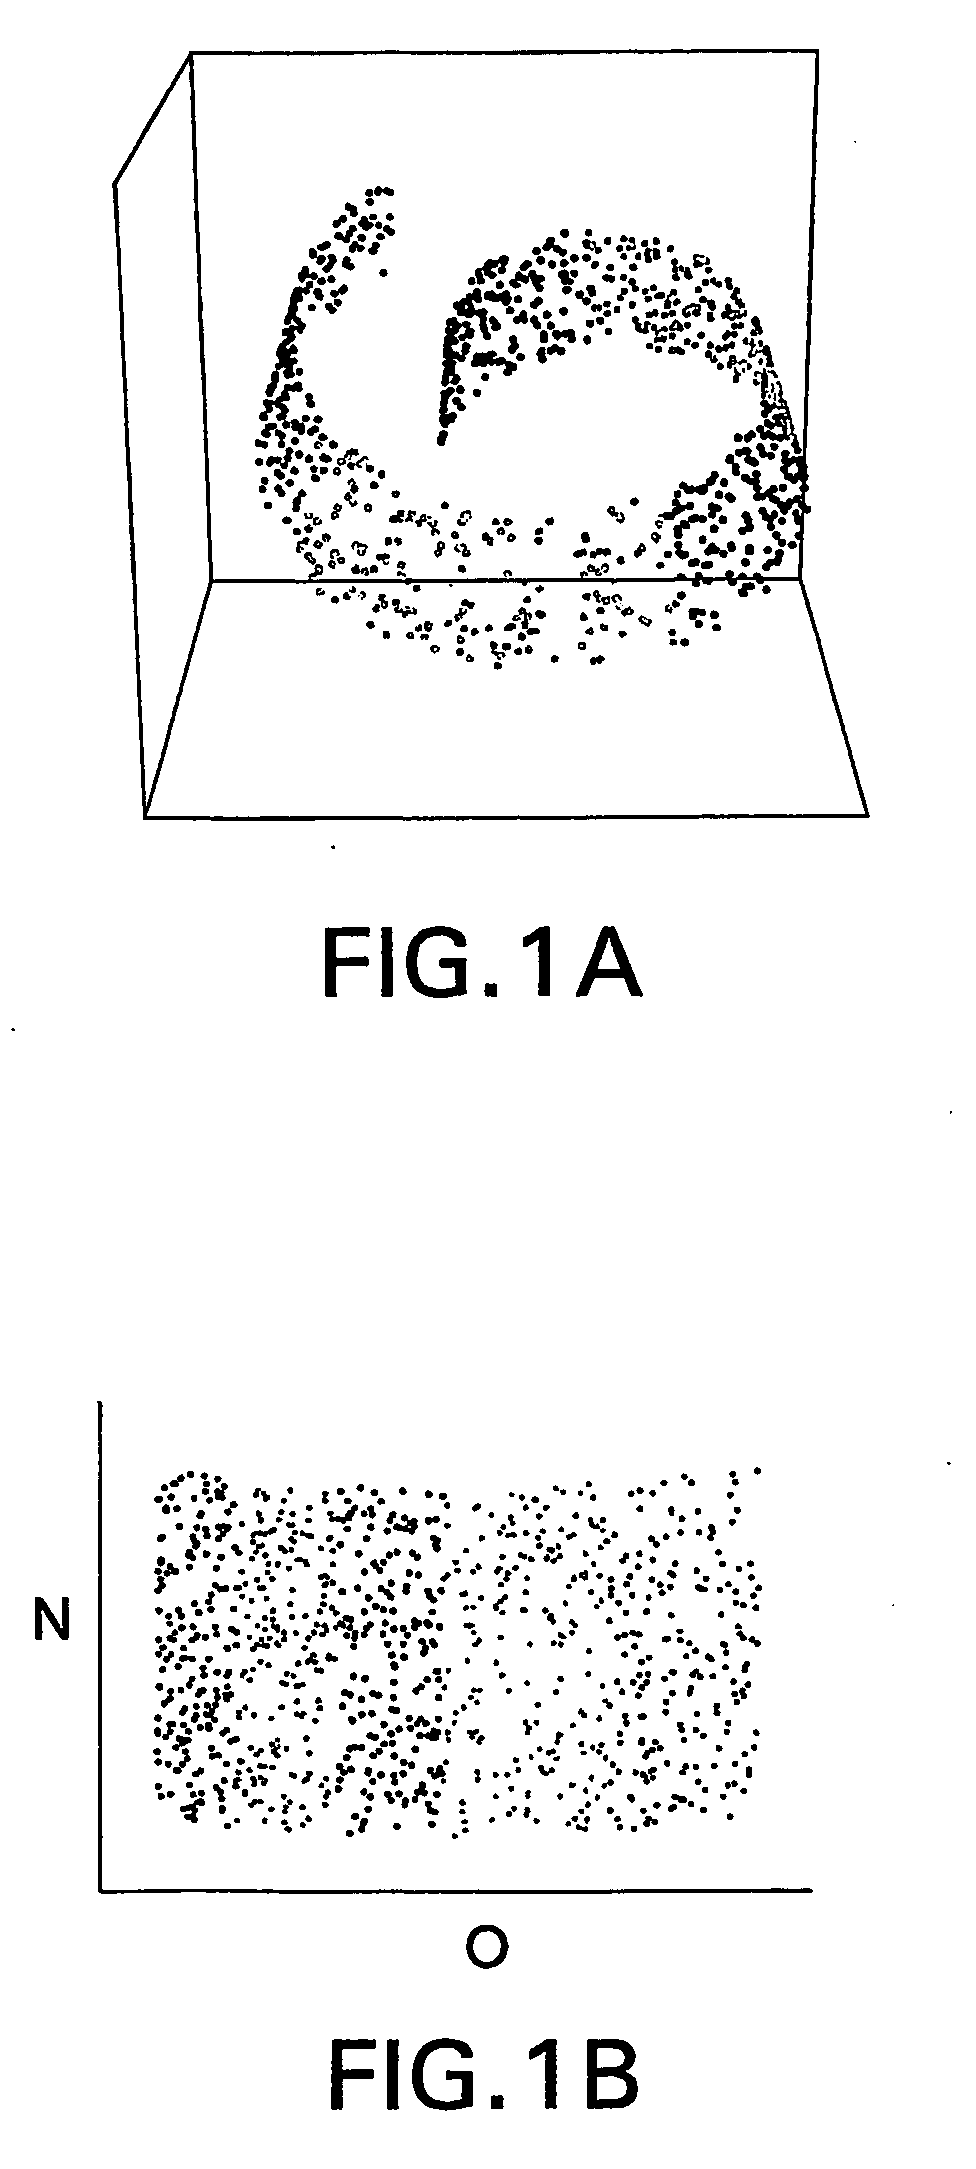 Methods, systems, and computer program products for representing object realtionships in a multidimensional space